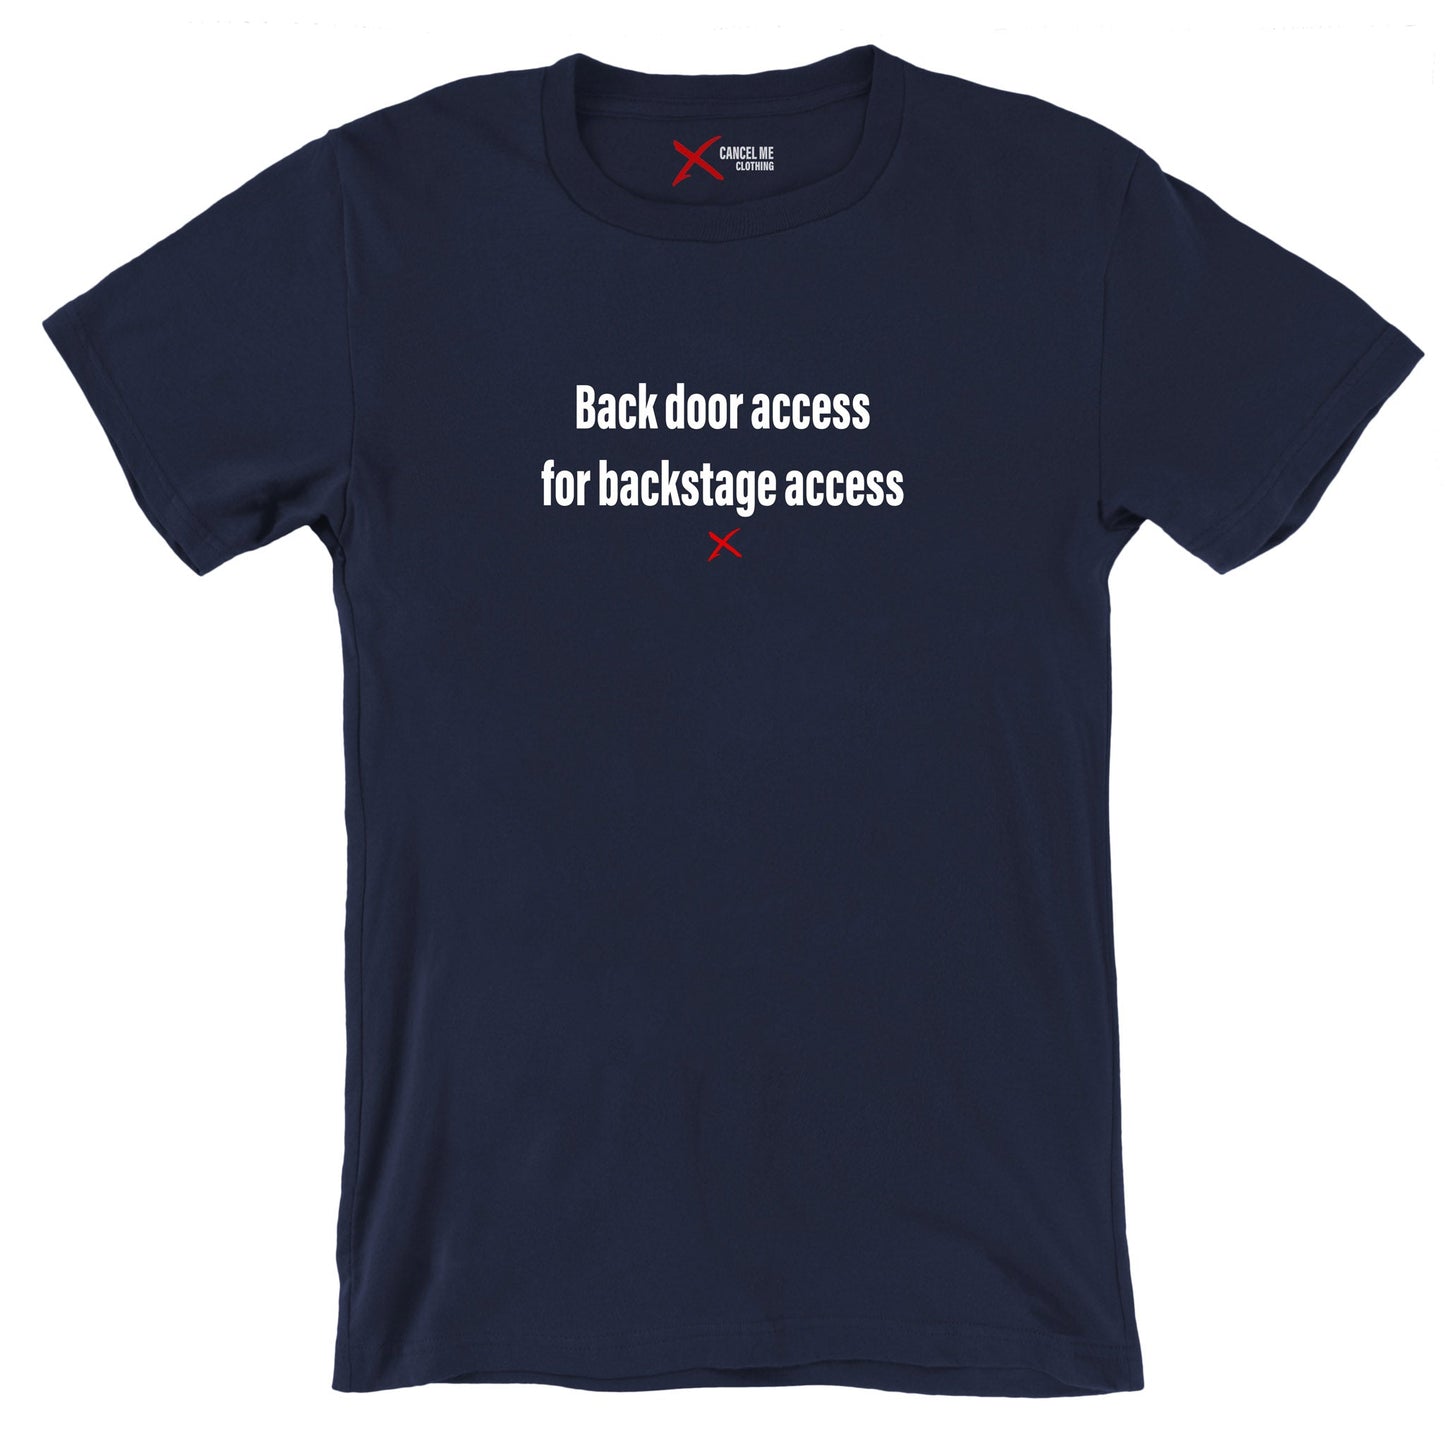 Back door access for backstage access - Shirt